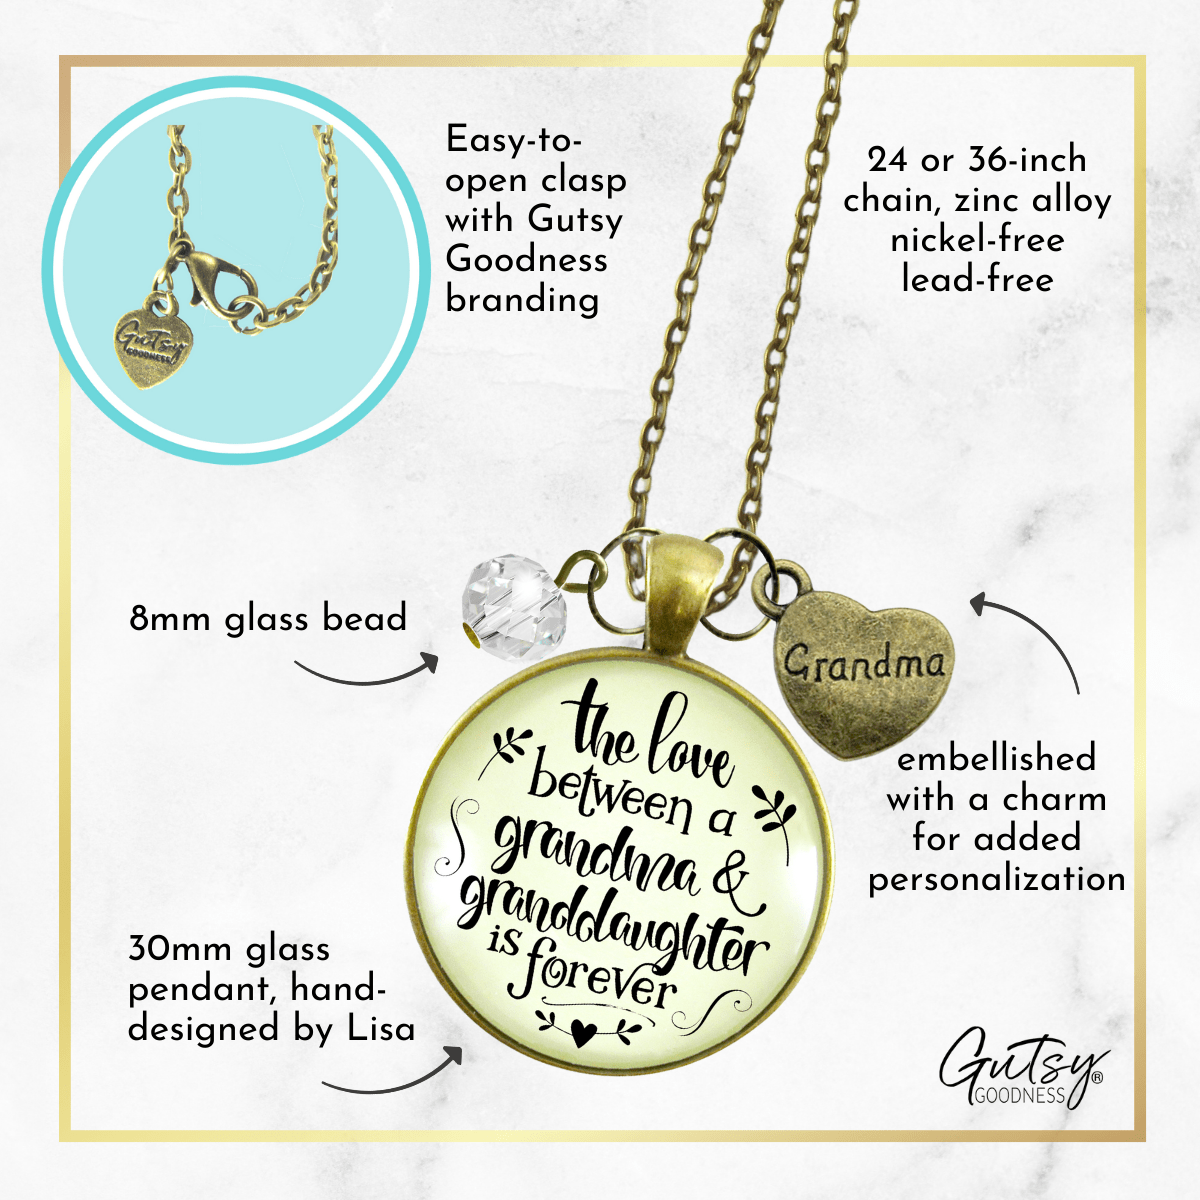 Gutsy Goodness To Grandmother Necklace Love Between A Grandma Is Forever Infinity Jewelry Gift - Gutsy Goodness Handmade Jewelry;To Grandmother Necklace Love Between A Grandma Is Forever Infinity Jewelry Gift - Gutsy Goodness Handmade Jewelry Gifts